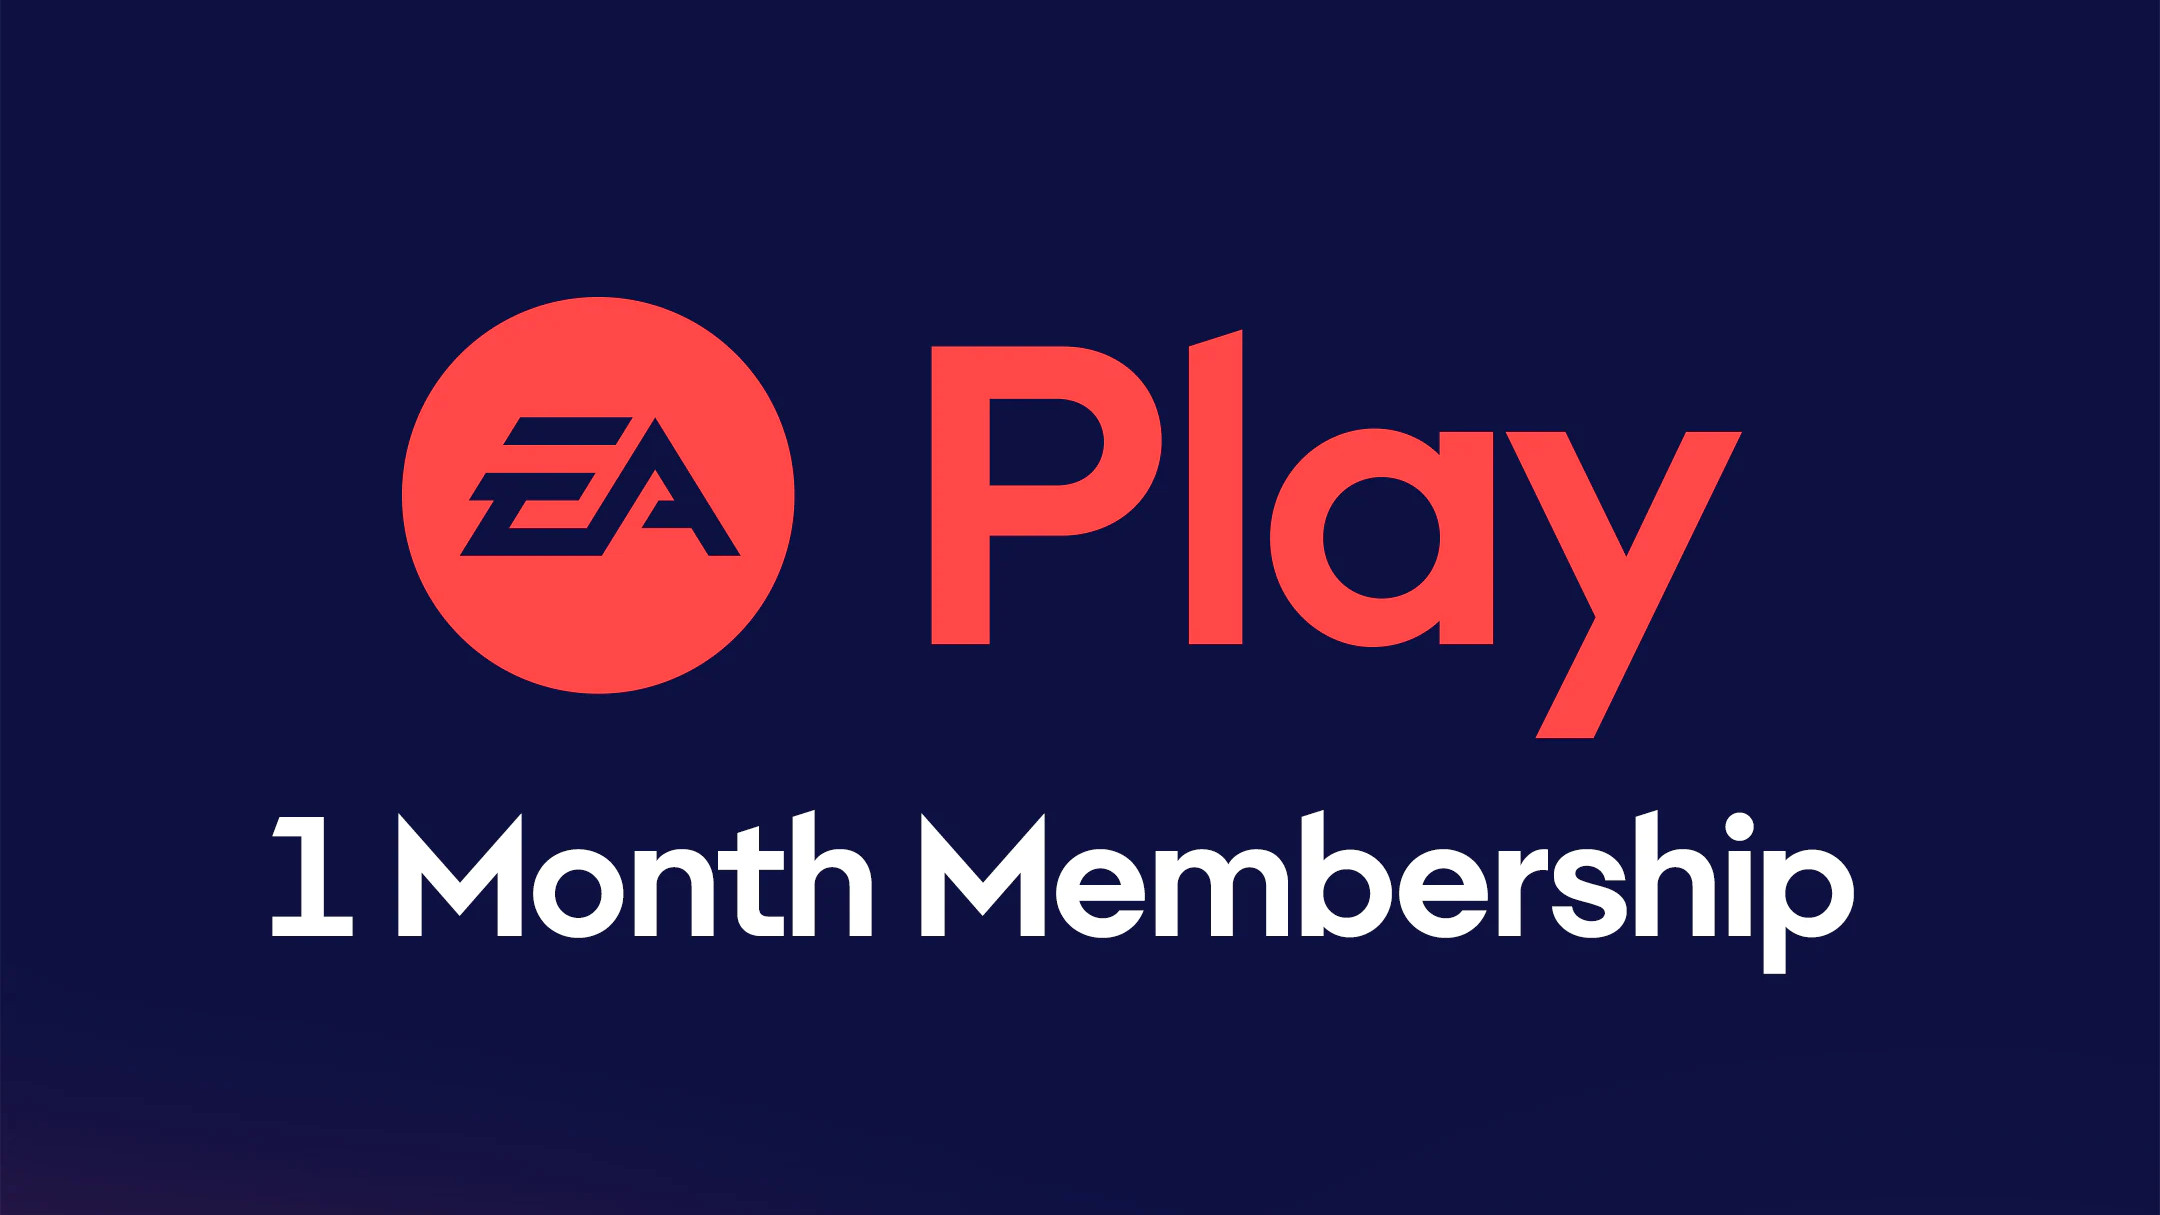 EA Play - 1 Month Subscription Key $20.31